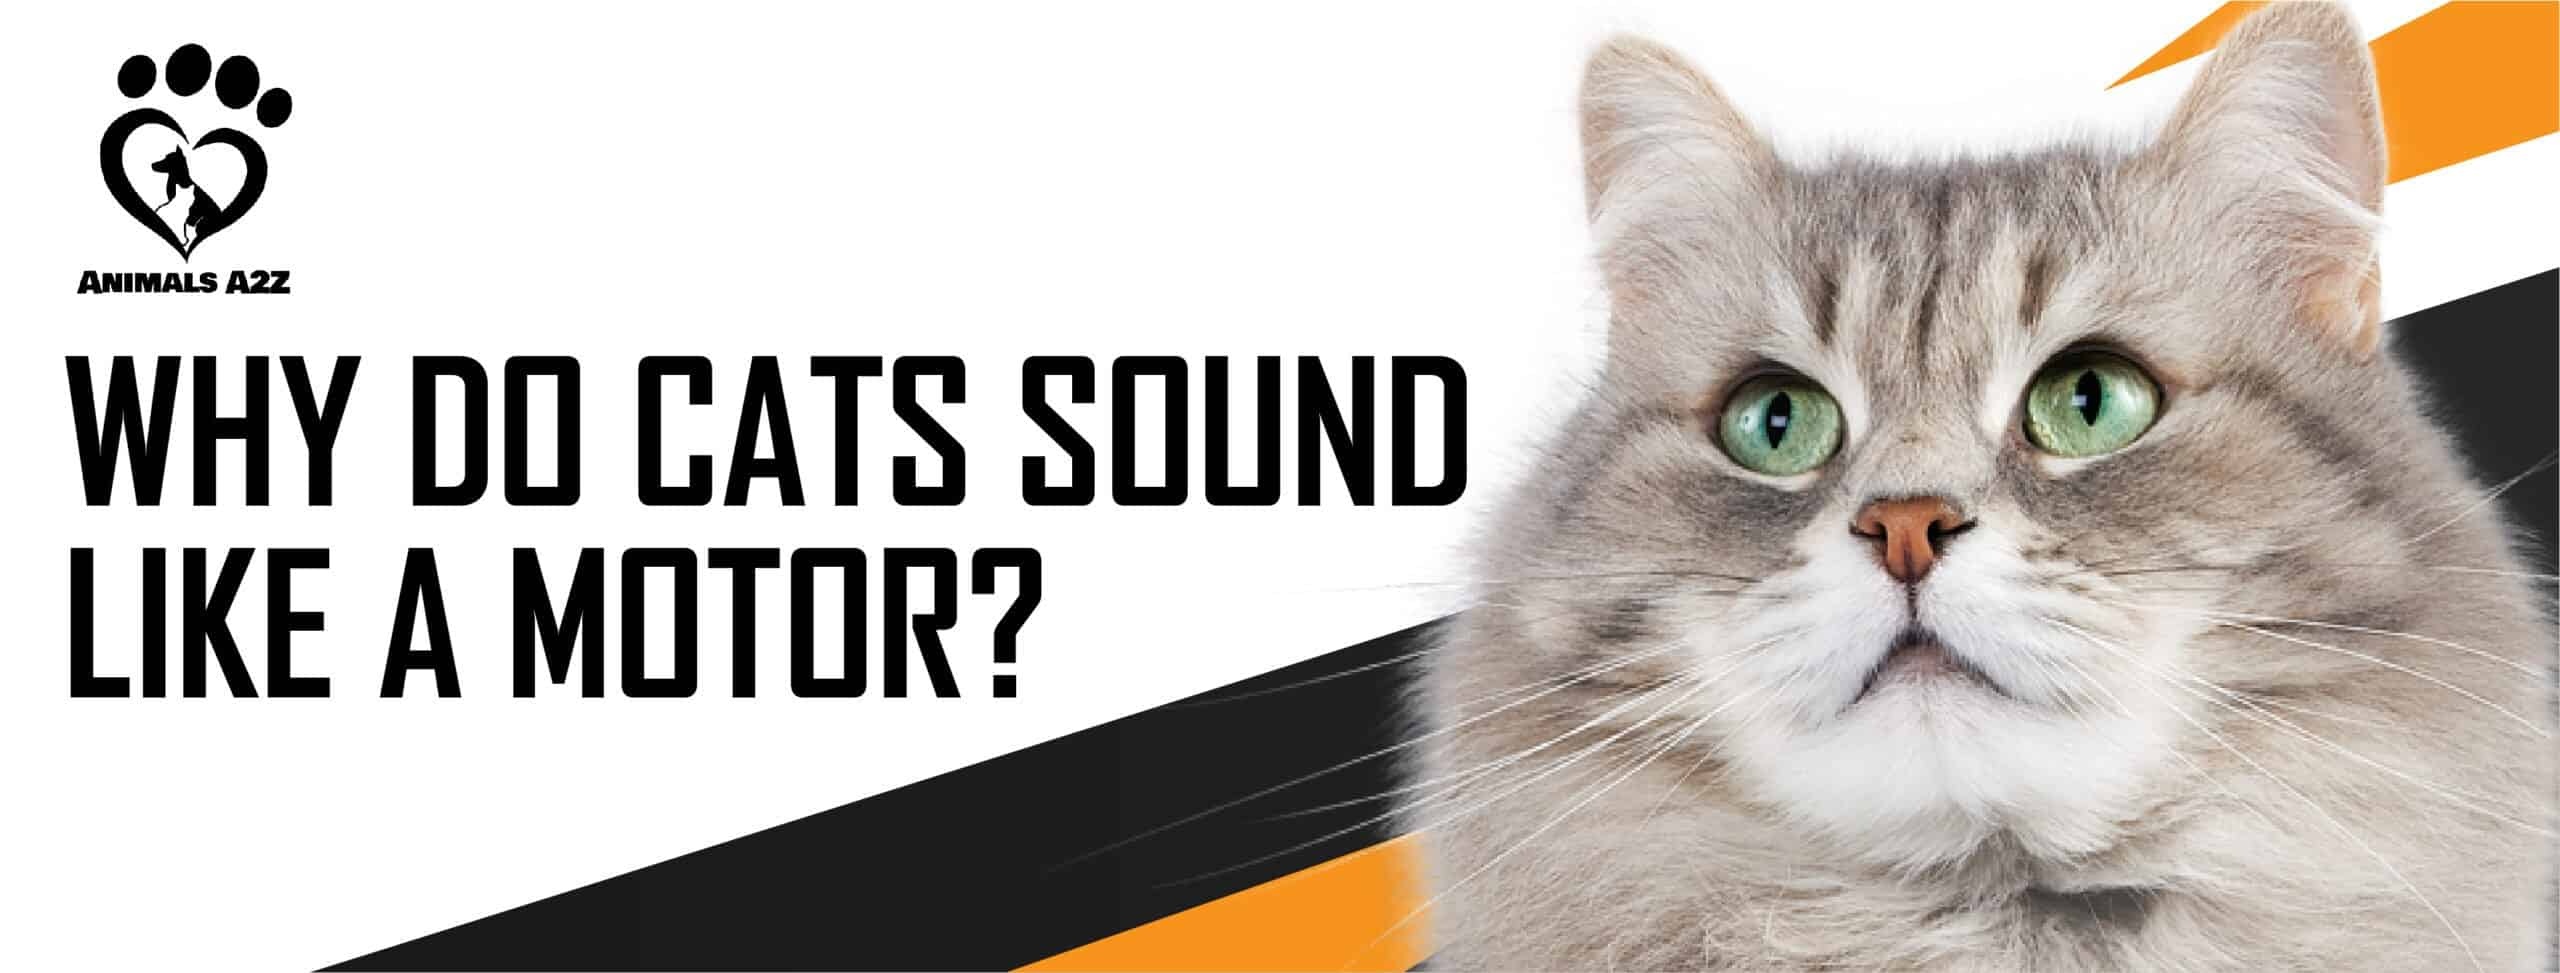 Why-do-cats-sound-like-a-motor_-featured-image-scaled-1.jpg